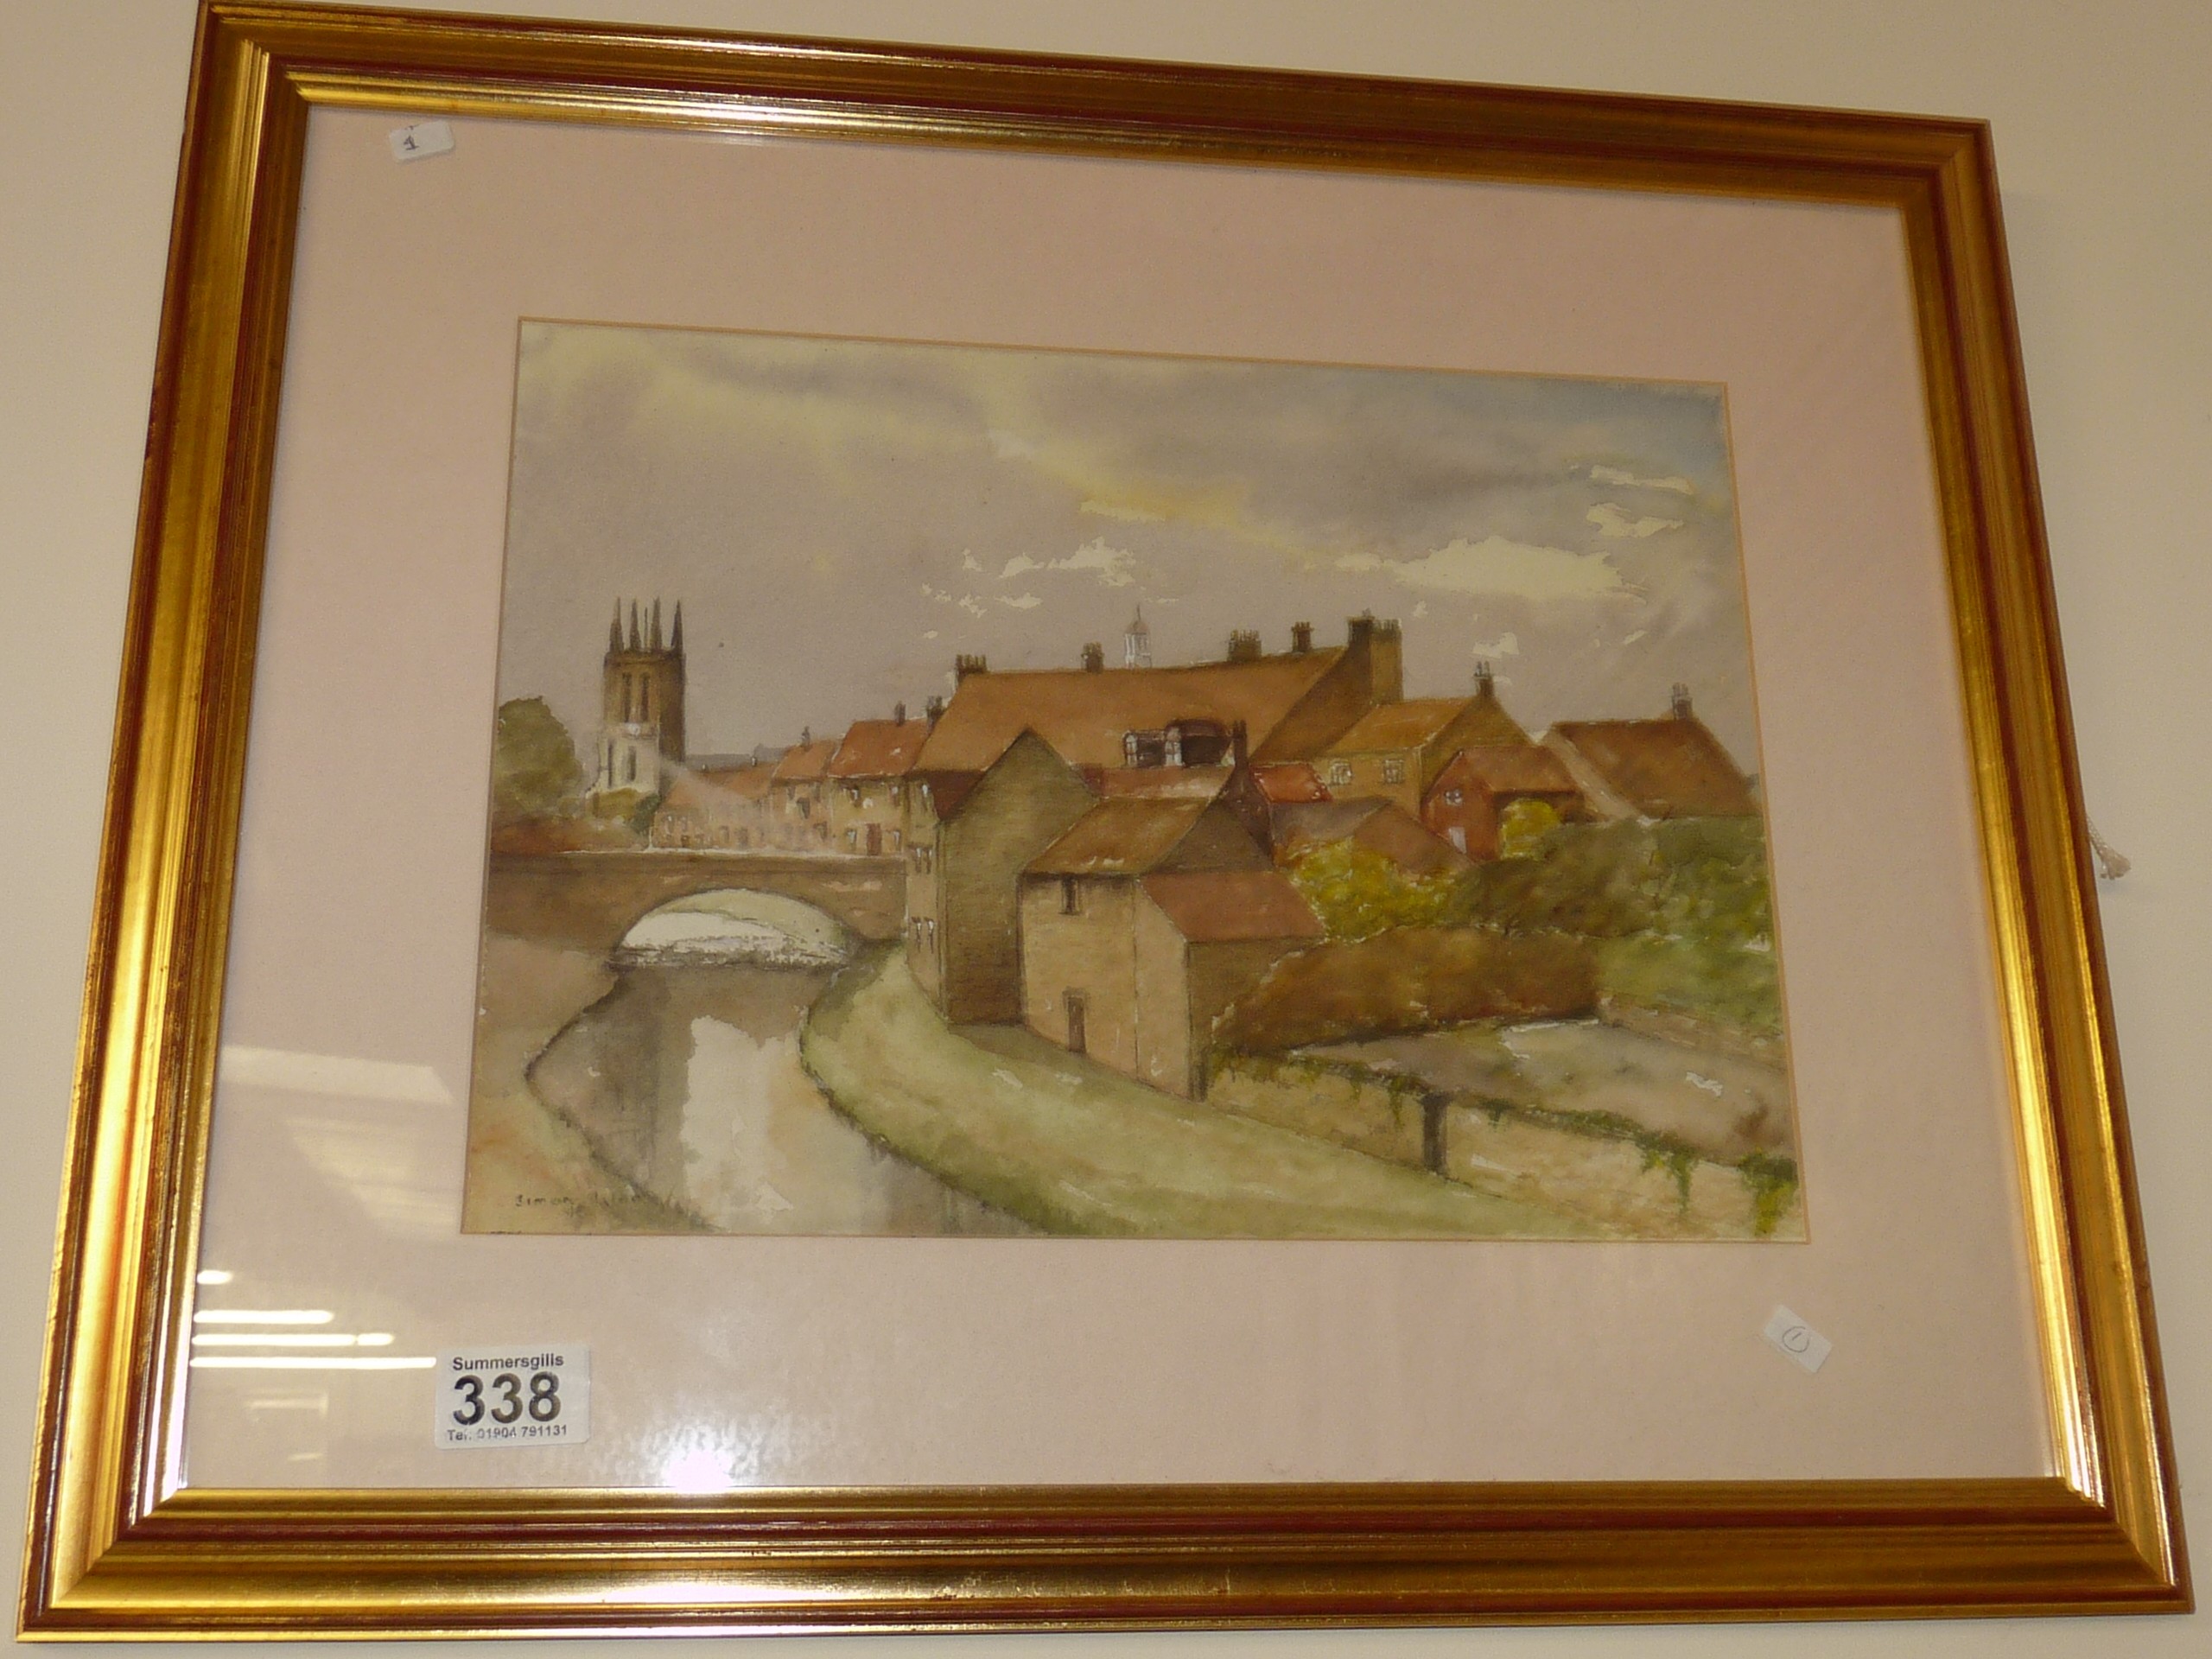 Watercolour of Helmsley, North Yorkshire